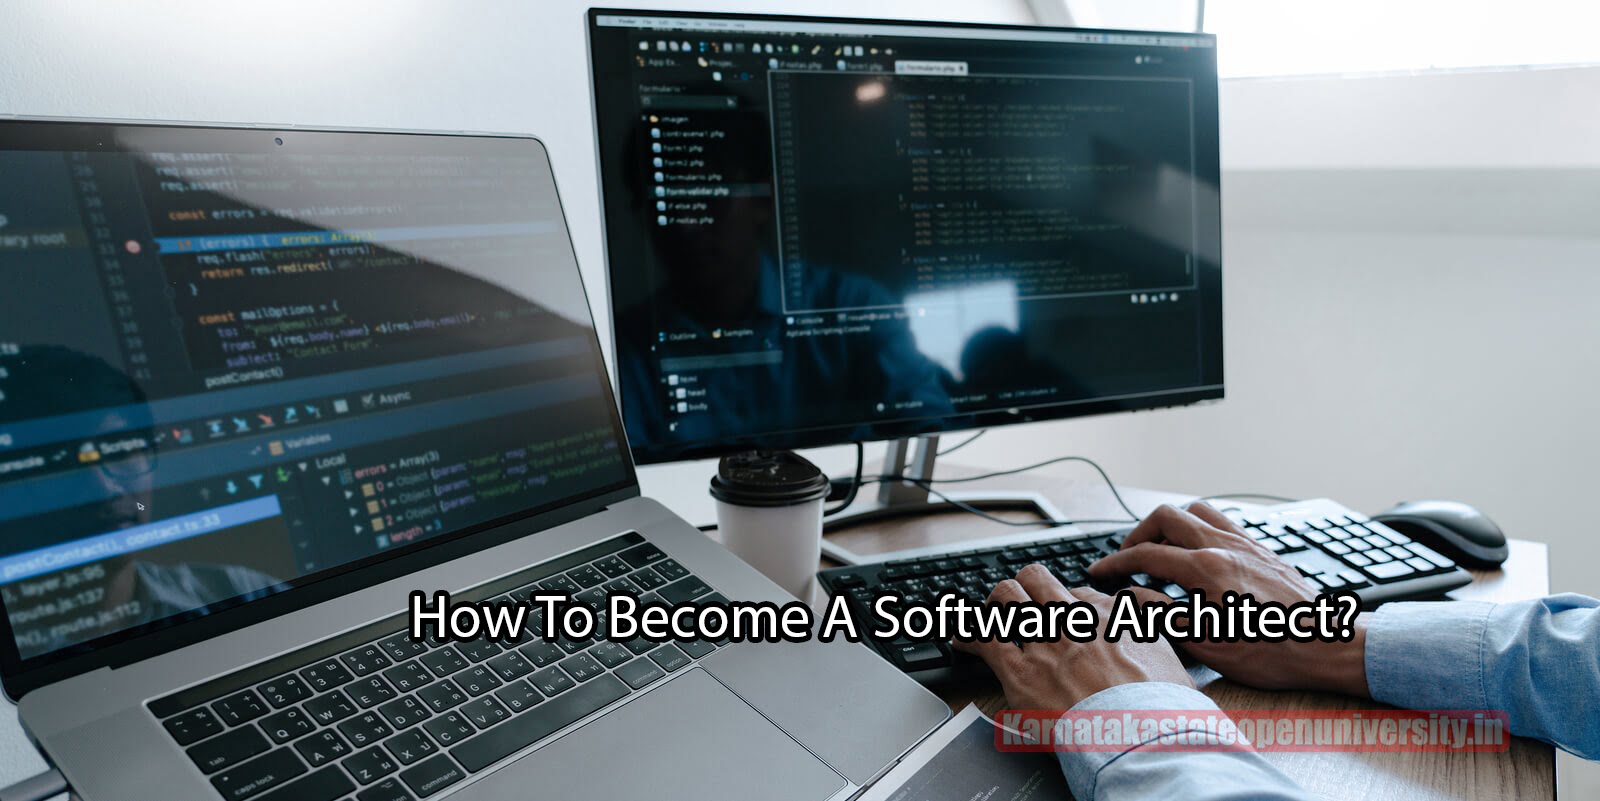 How To Become A Software Architect?